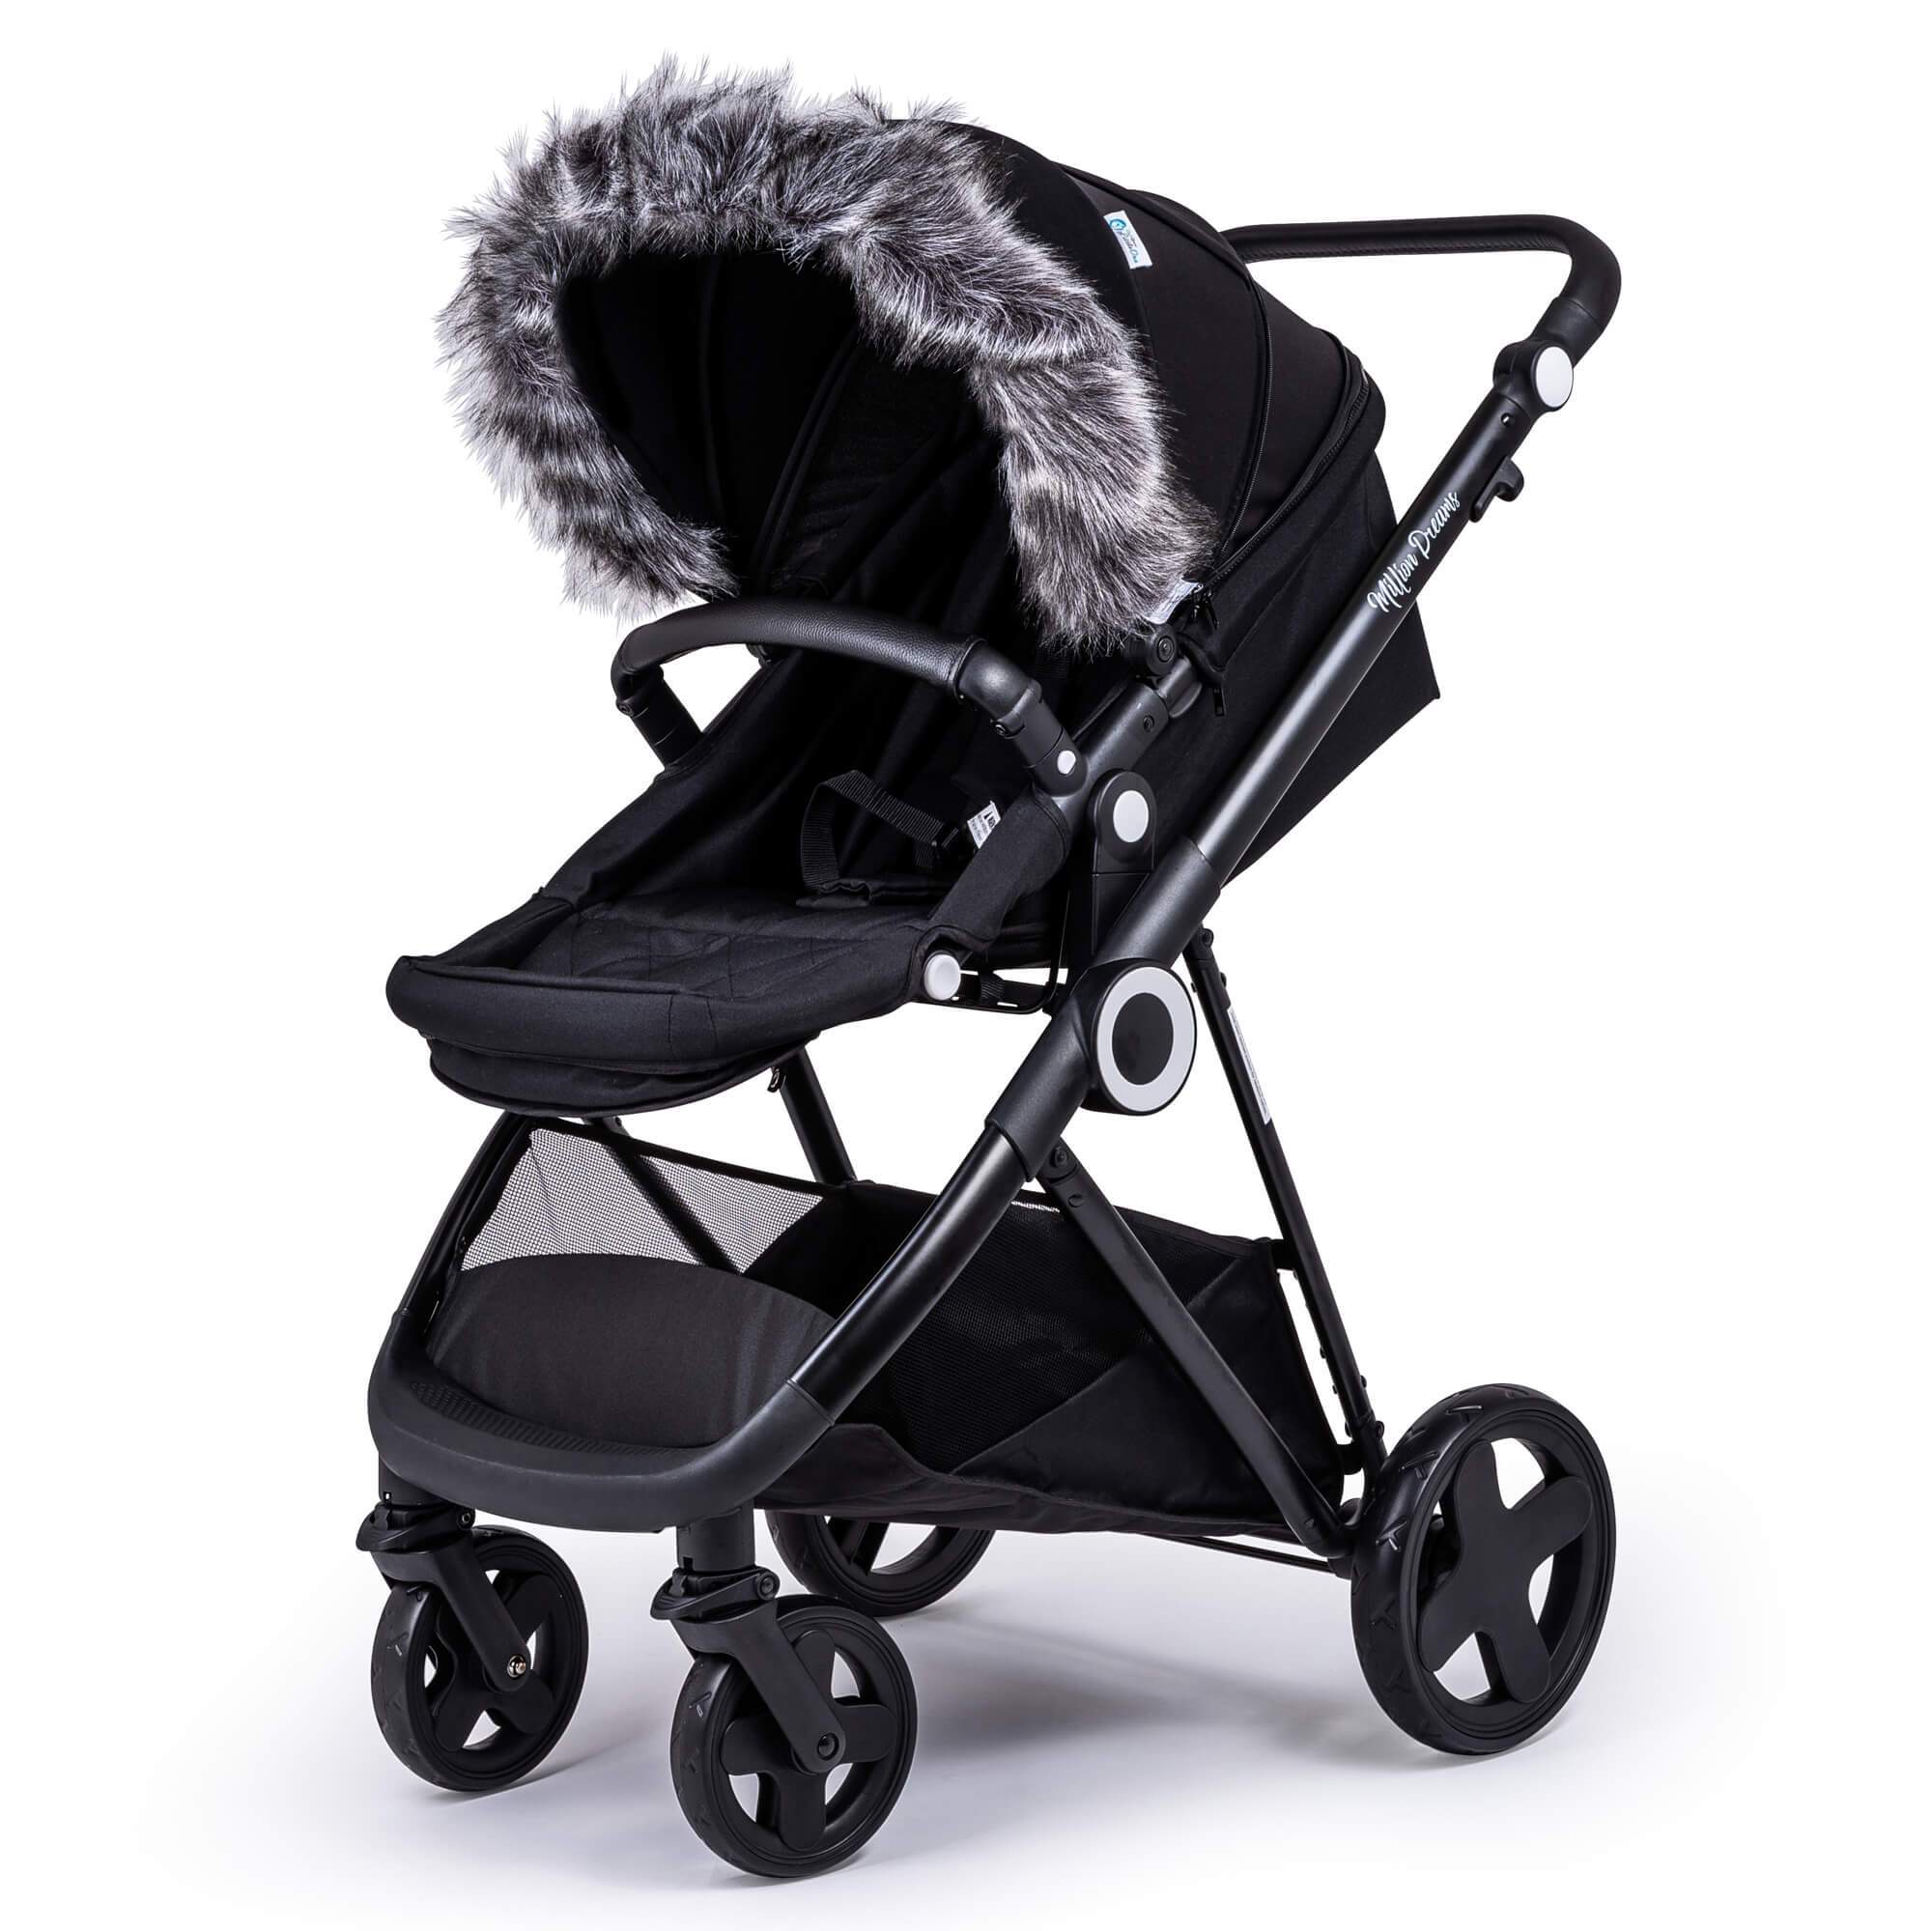 Pram Fur Hood Trim Attachment for Pushchair Compatible with Combi - Dark Grey / Fits All Models | For Your Little One